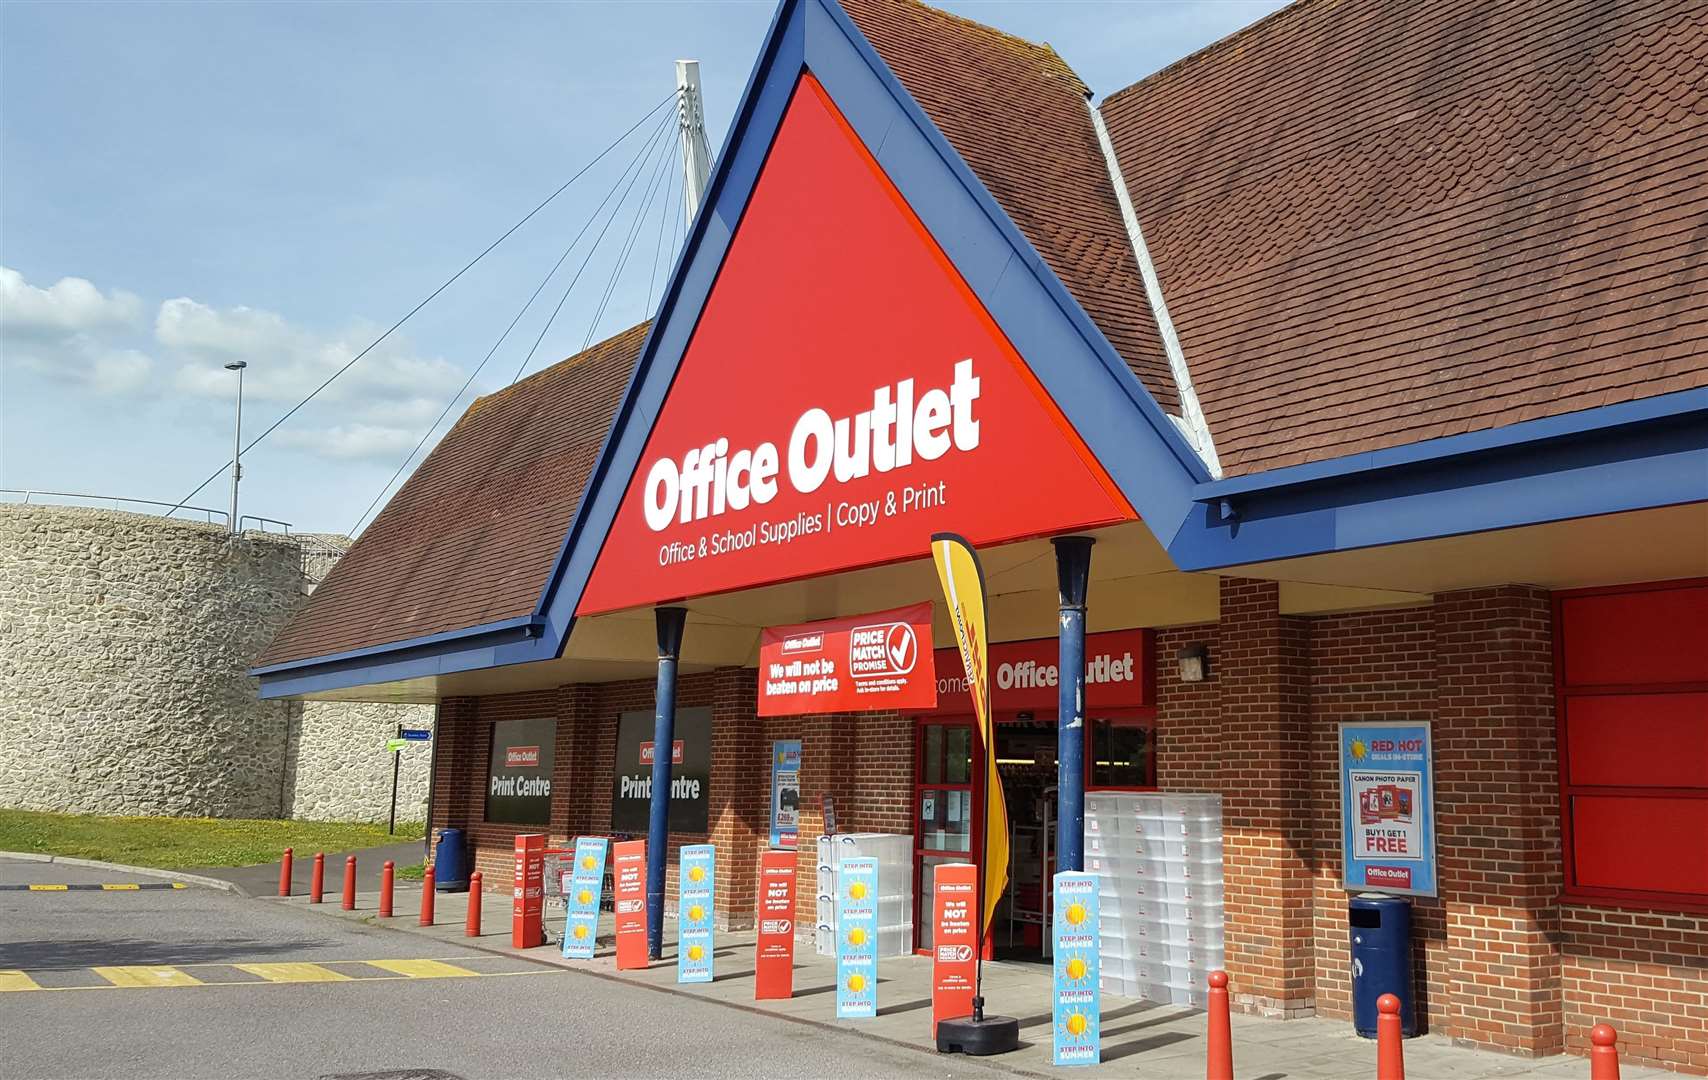 The Office Outlet store in Ashford - previously a Staples